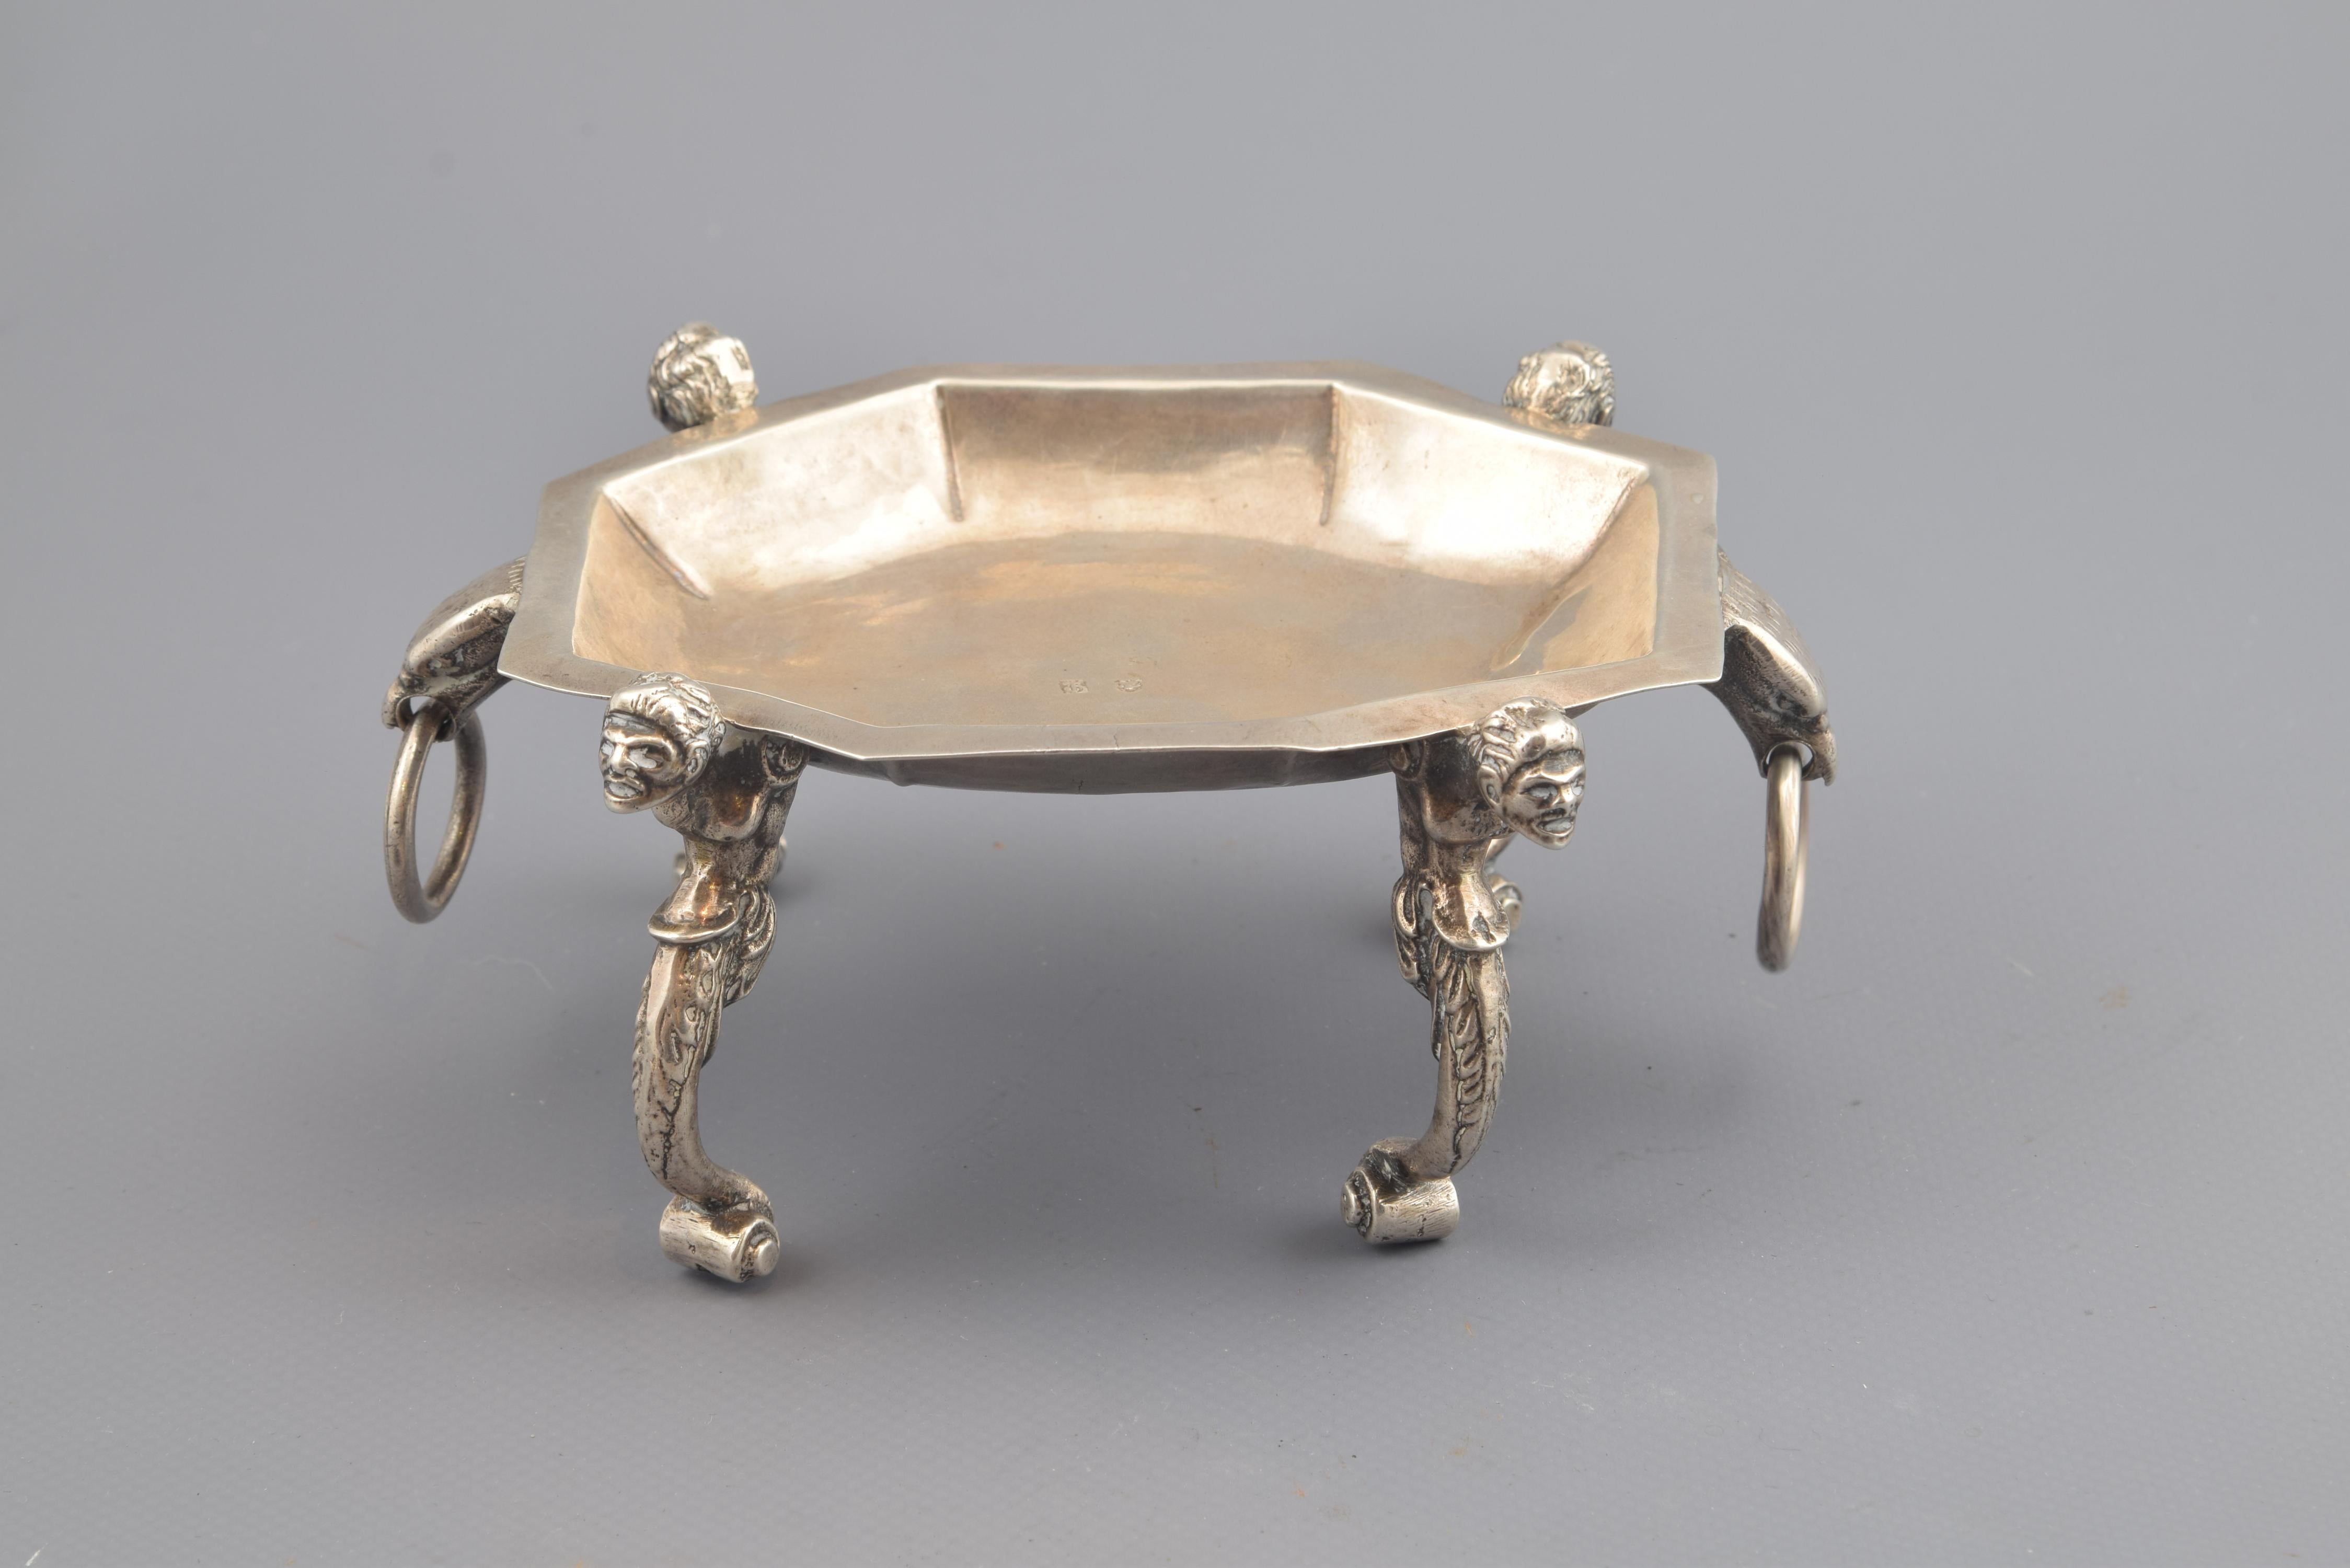 Specie or silver salt cellar in its color composed of a tray not very deep polygonal, raised and enhanced by four legs and also has two protomes of animals holding rings (eagles or lions). The legs have a lower scroll finish, which gives way to a